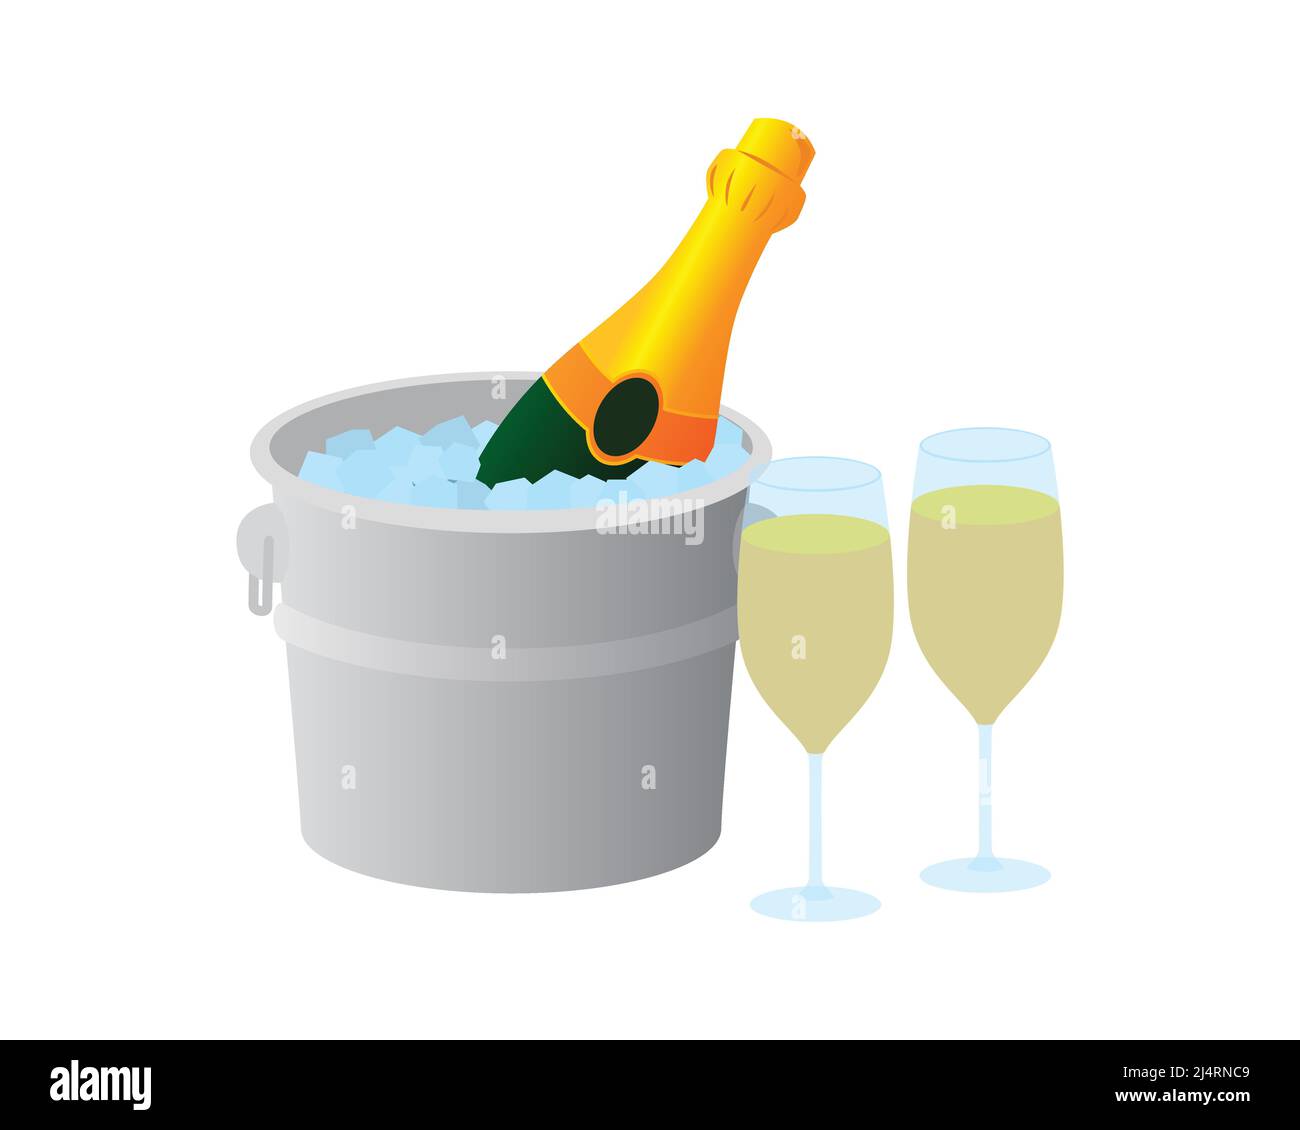 Bottle of Champagne in a Bucket with Ice Vector Stock Vector